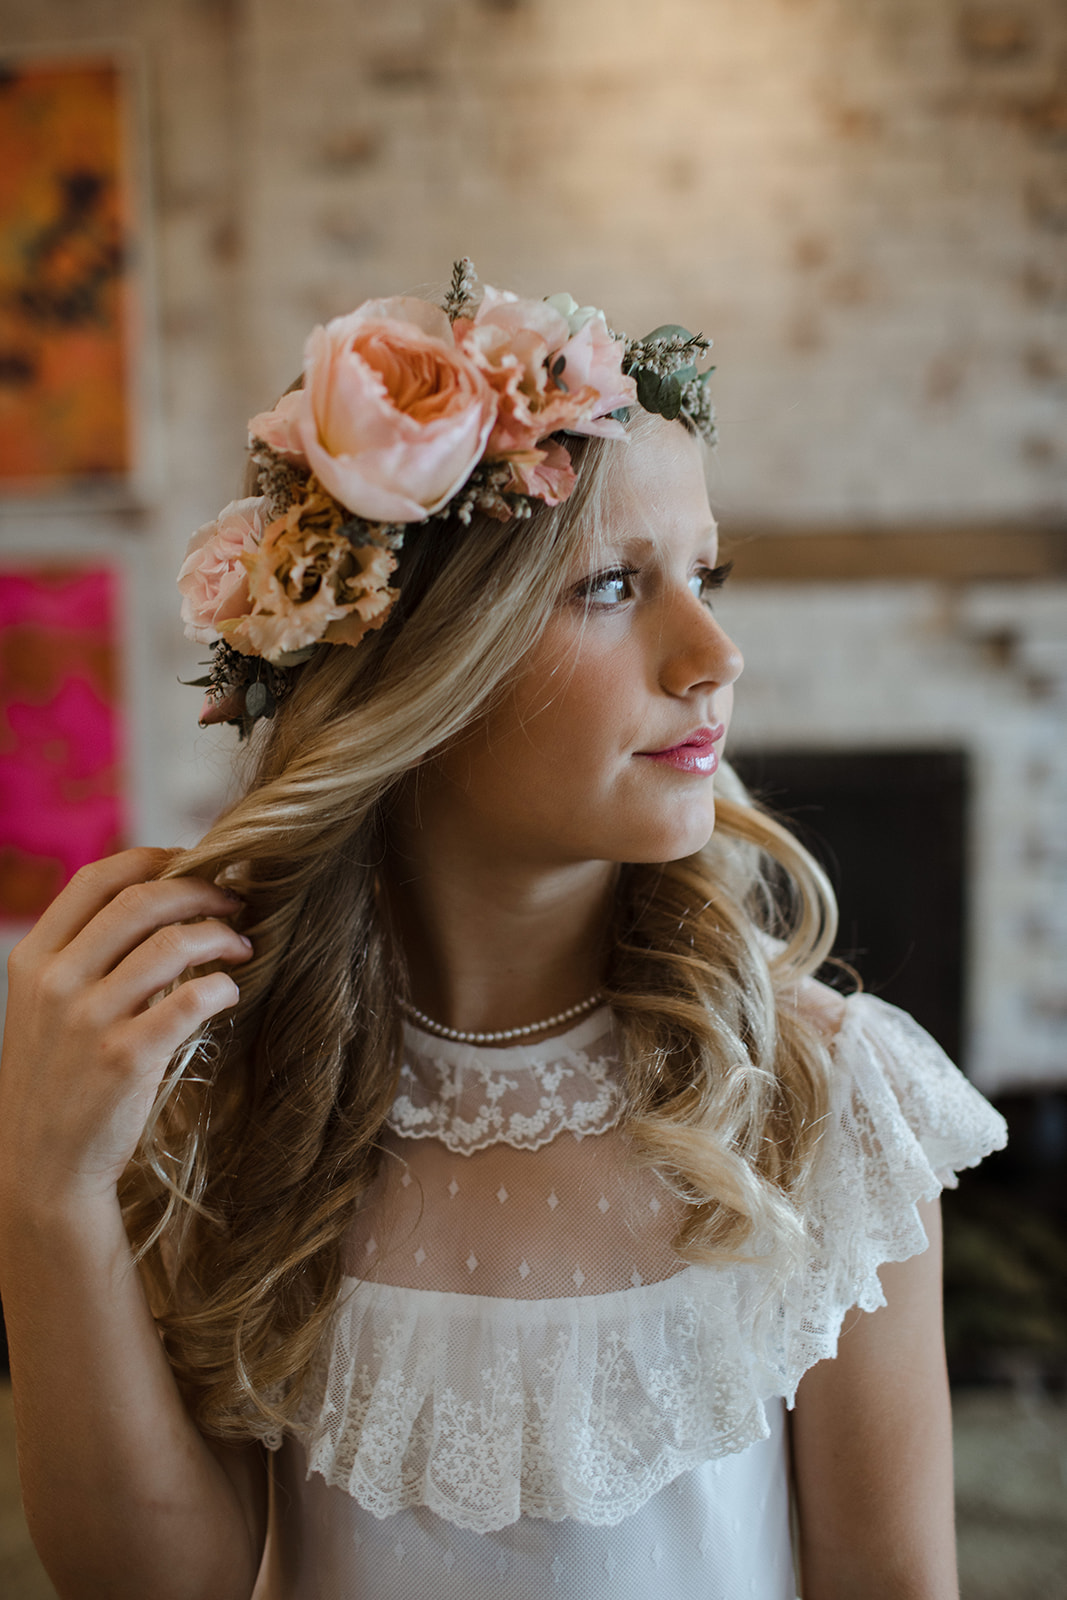 Oversized flower girl crown with peach garden roses and ranunculus.